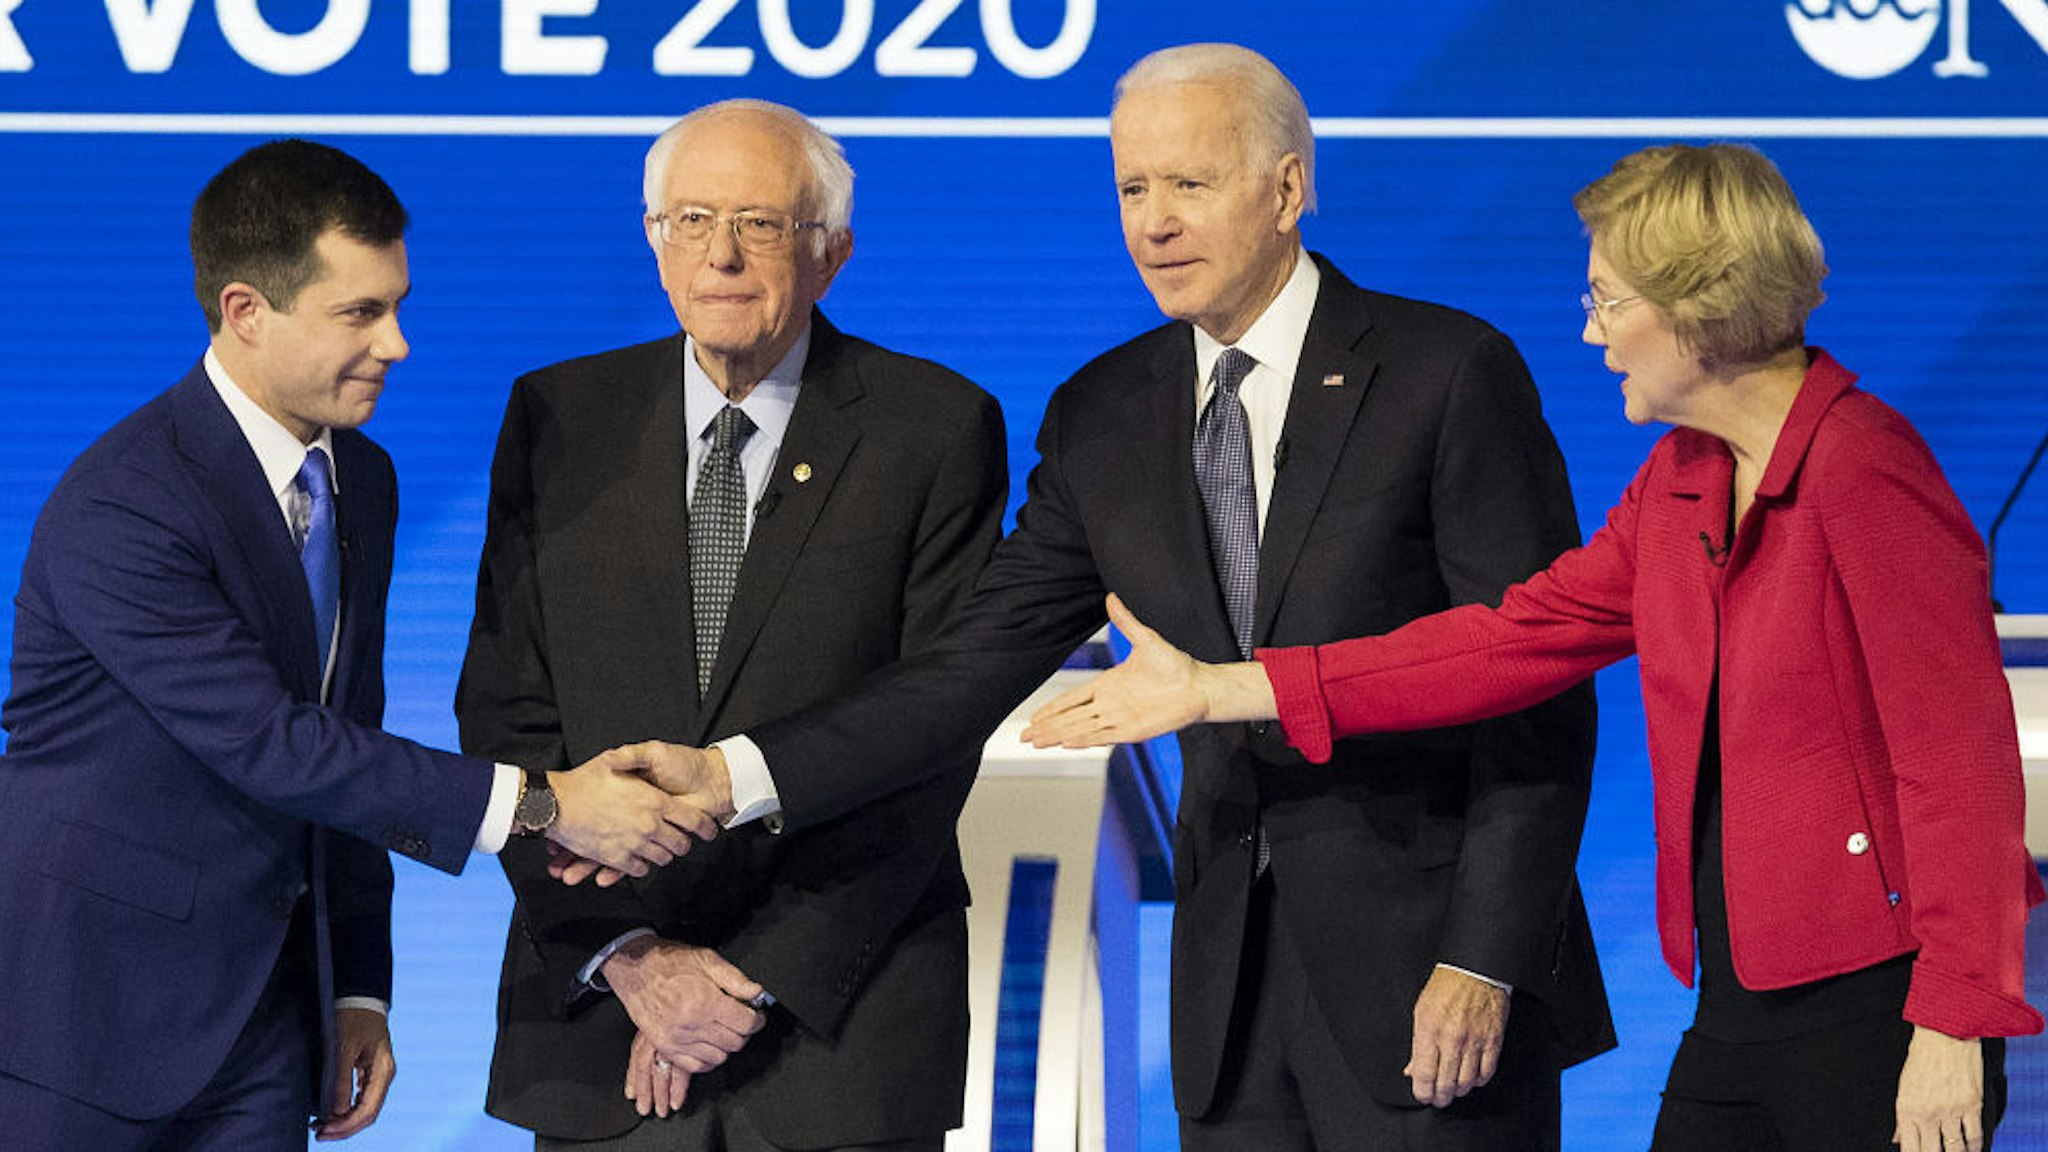 Pete Buttigieg, former mayor of South Bend and 2020 presidential candidate, left, shakes hands with Former Vice President Joe Biden, as Senator Bernie Sanders, an Independent from Vermont, second left, and Senator Elizabeth Warren, a Democrat from Massachusetts, right, stand on stage ahead of the Democratic presidential debate at Saint Anselm College in Manchester, New Hampshire, U.S., on Friday, Feb. 7, 2020. The New Hampshire debates often mark a turning point in a presidential campaign, as the field of candidates is winnowed and voters begin to pay closer attention. Photographer: Adam Glanzman/Bloomberg